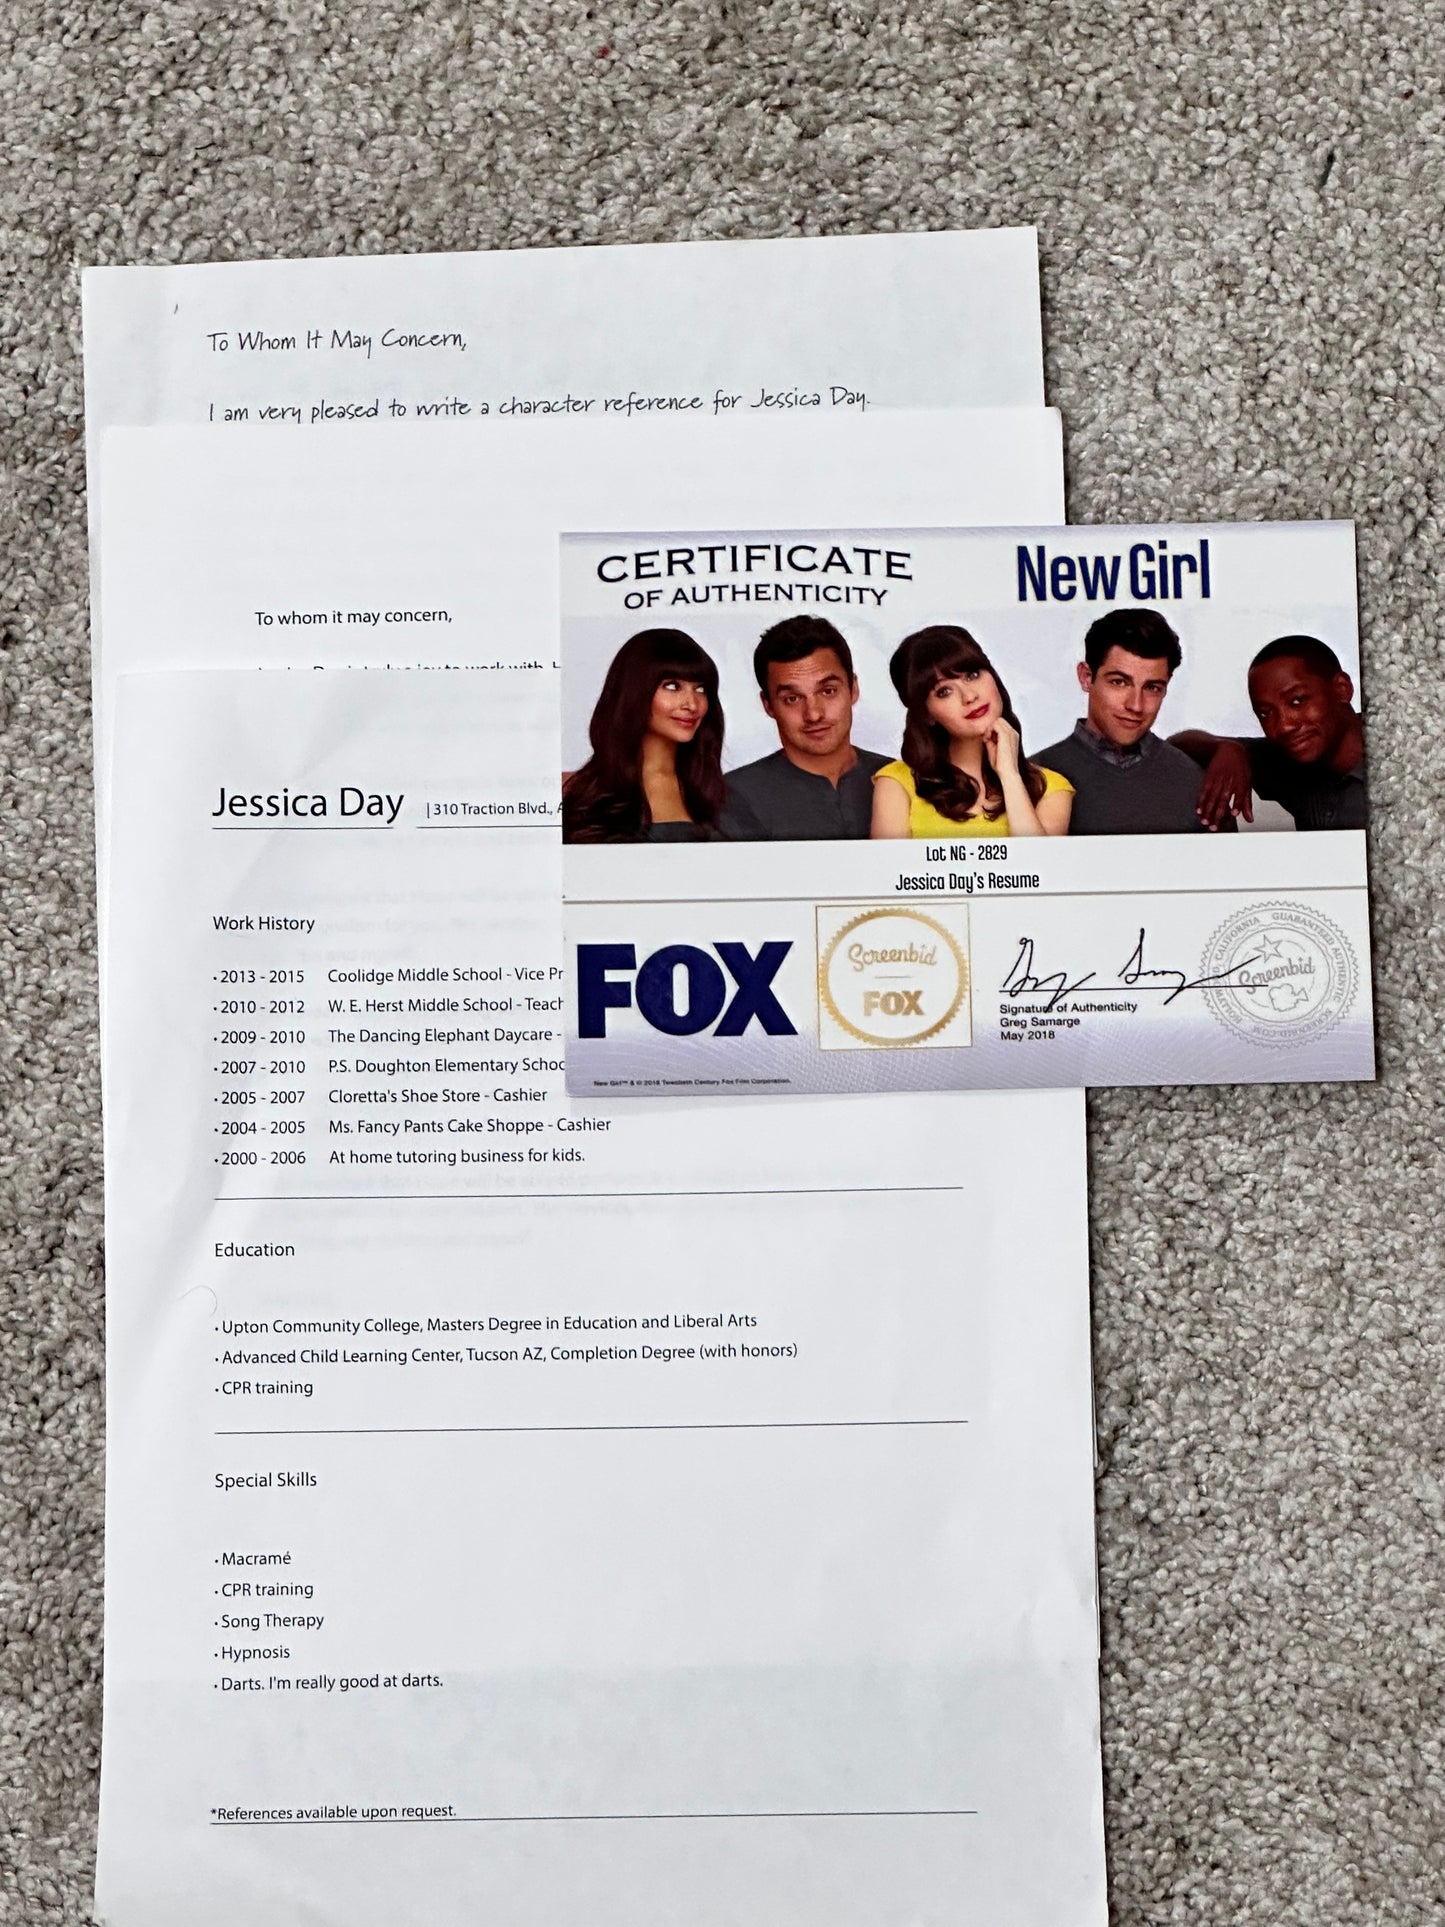 NEW GIRL: Jessica Day's Resume and Letters of Recommendation